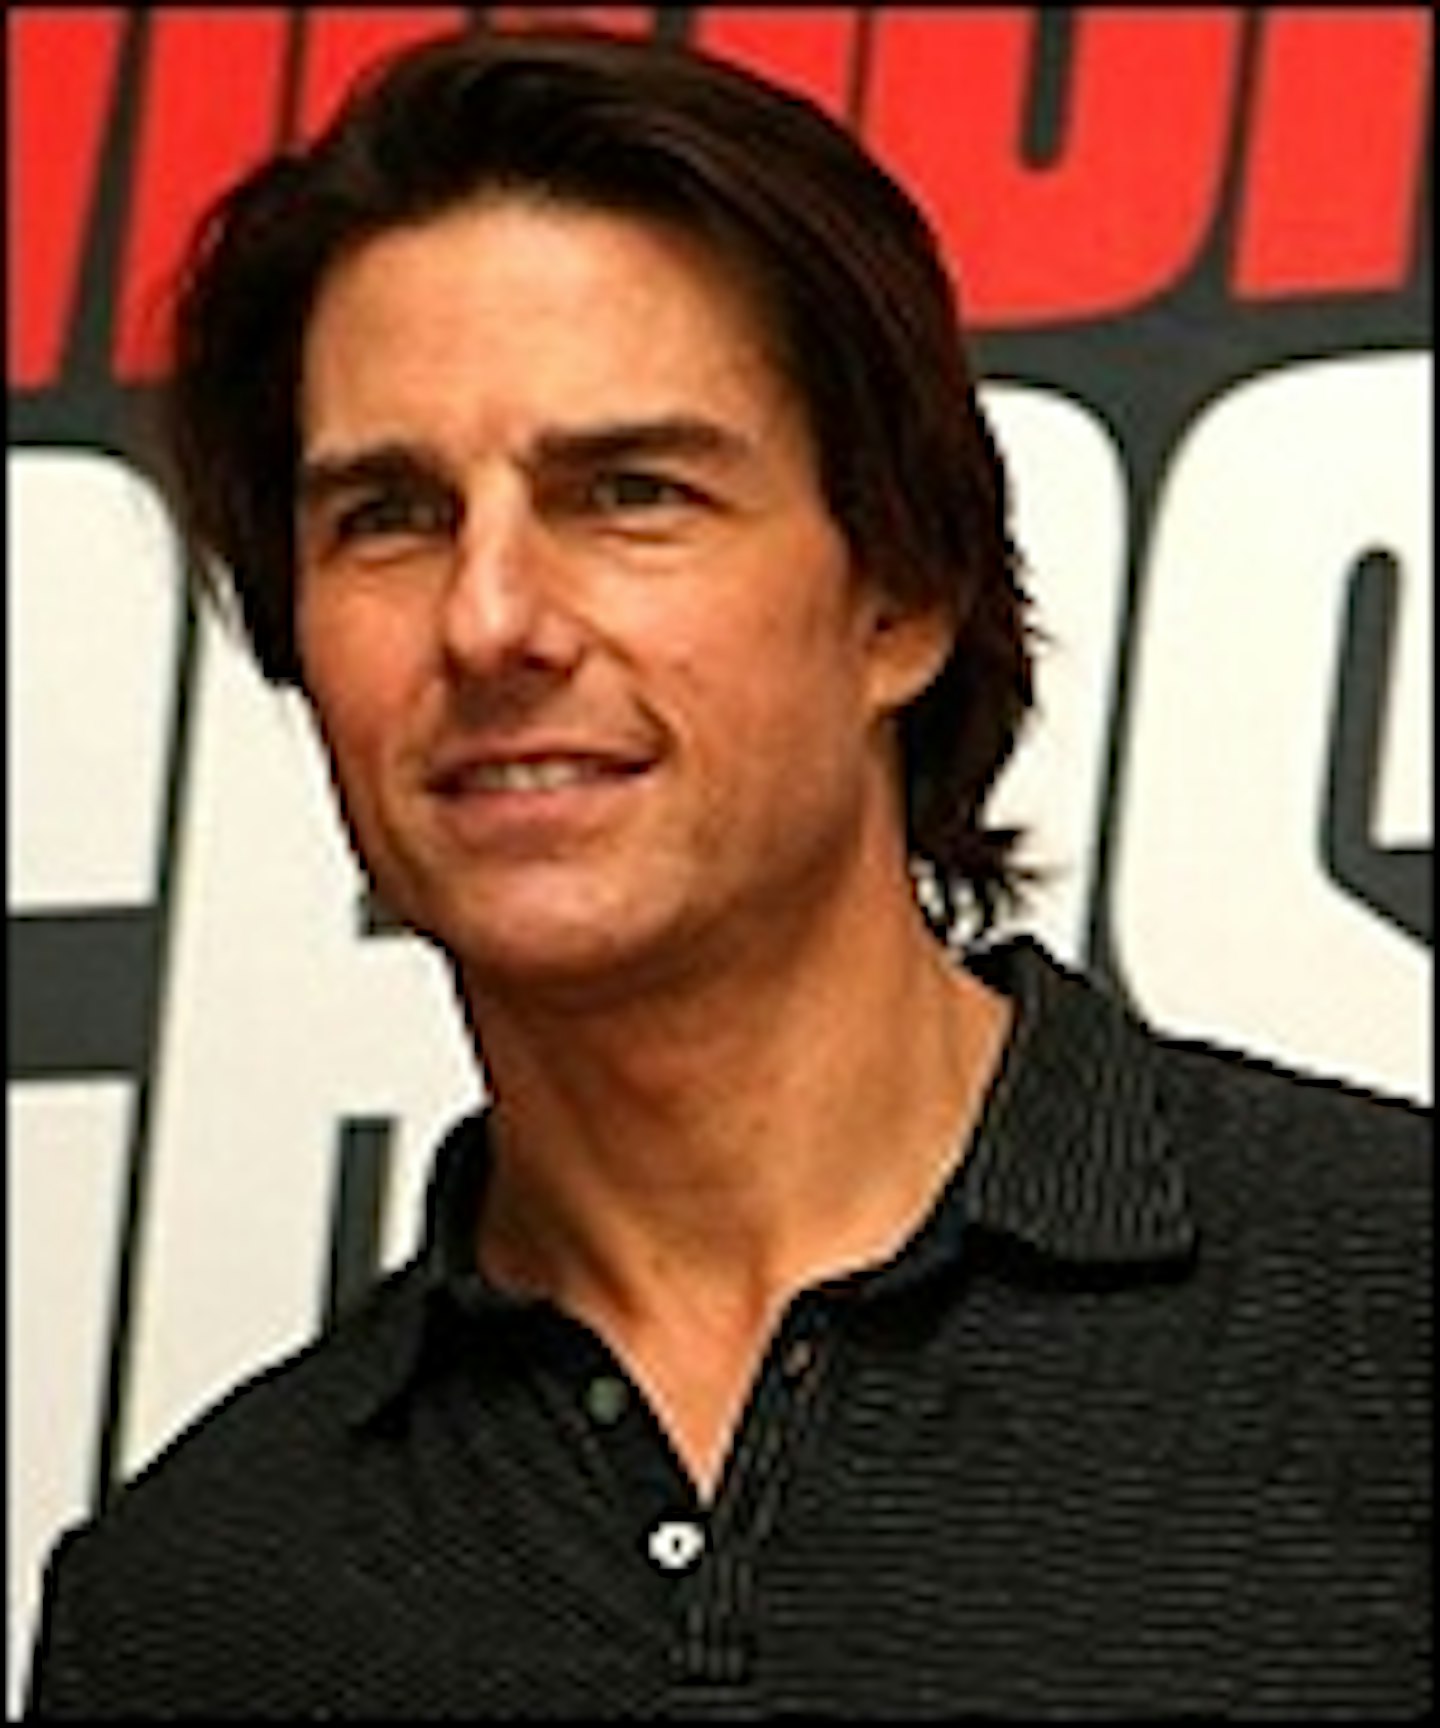 Tom Cruise May Find A Star Is Born